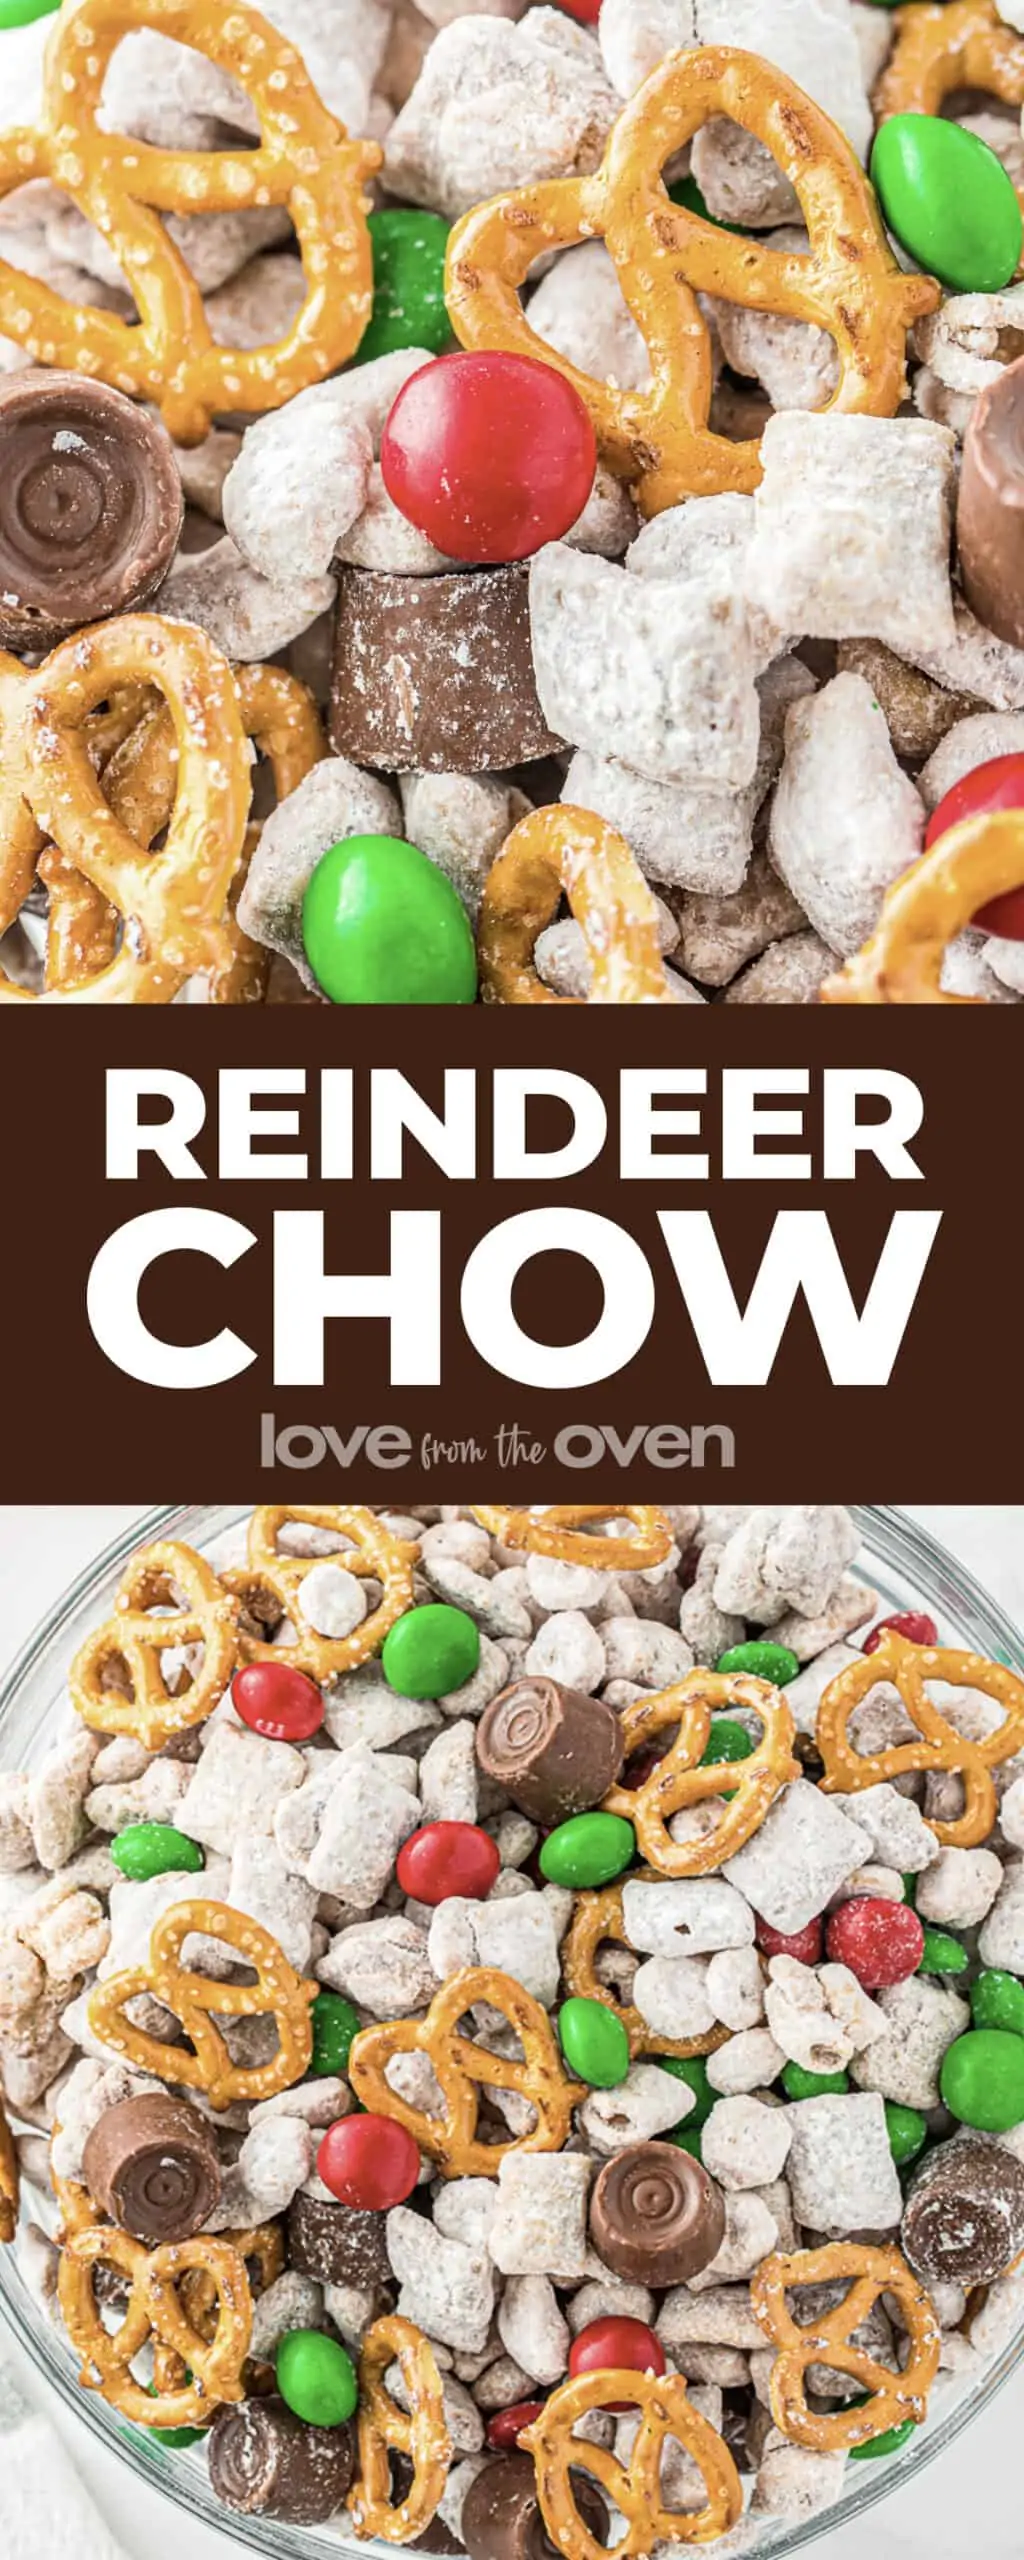 A bowl of reindeer chow snack mix.